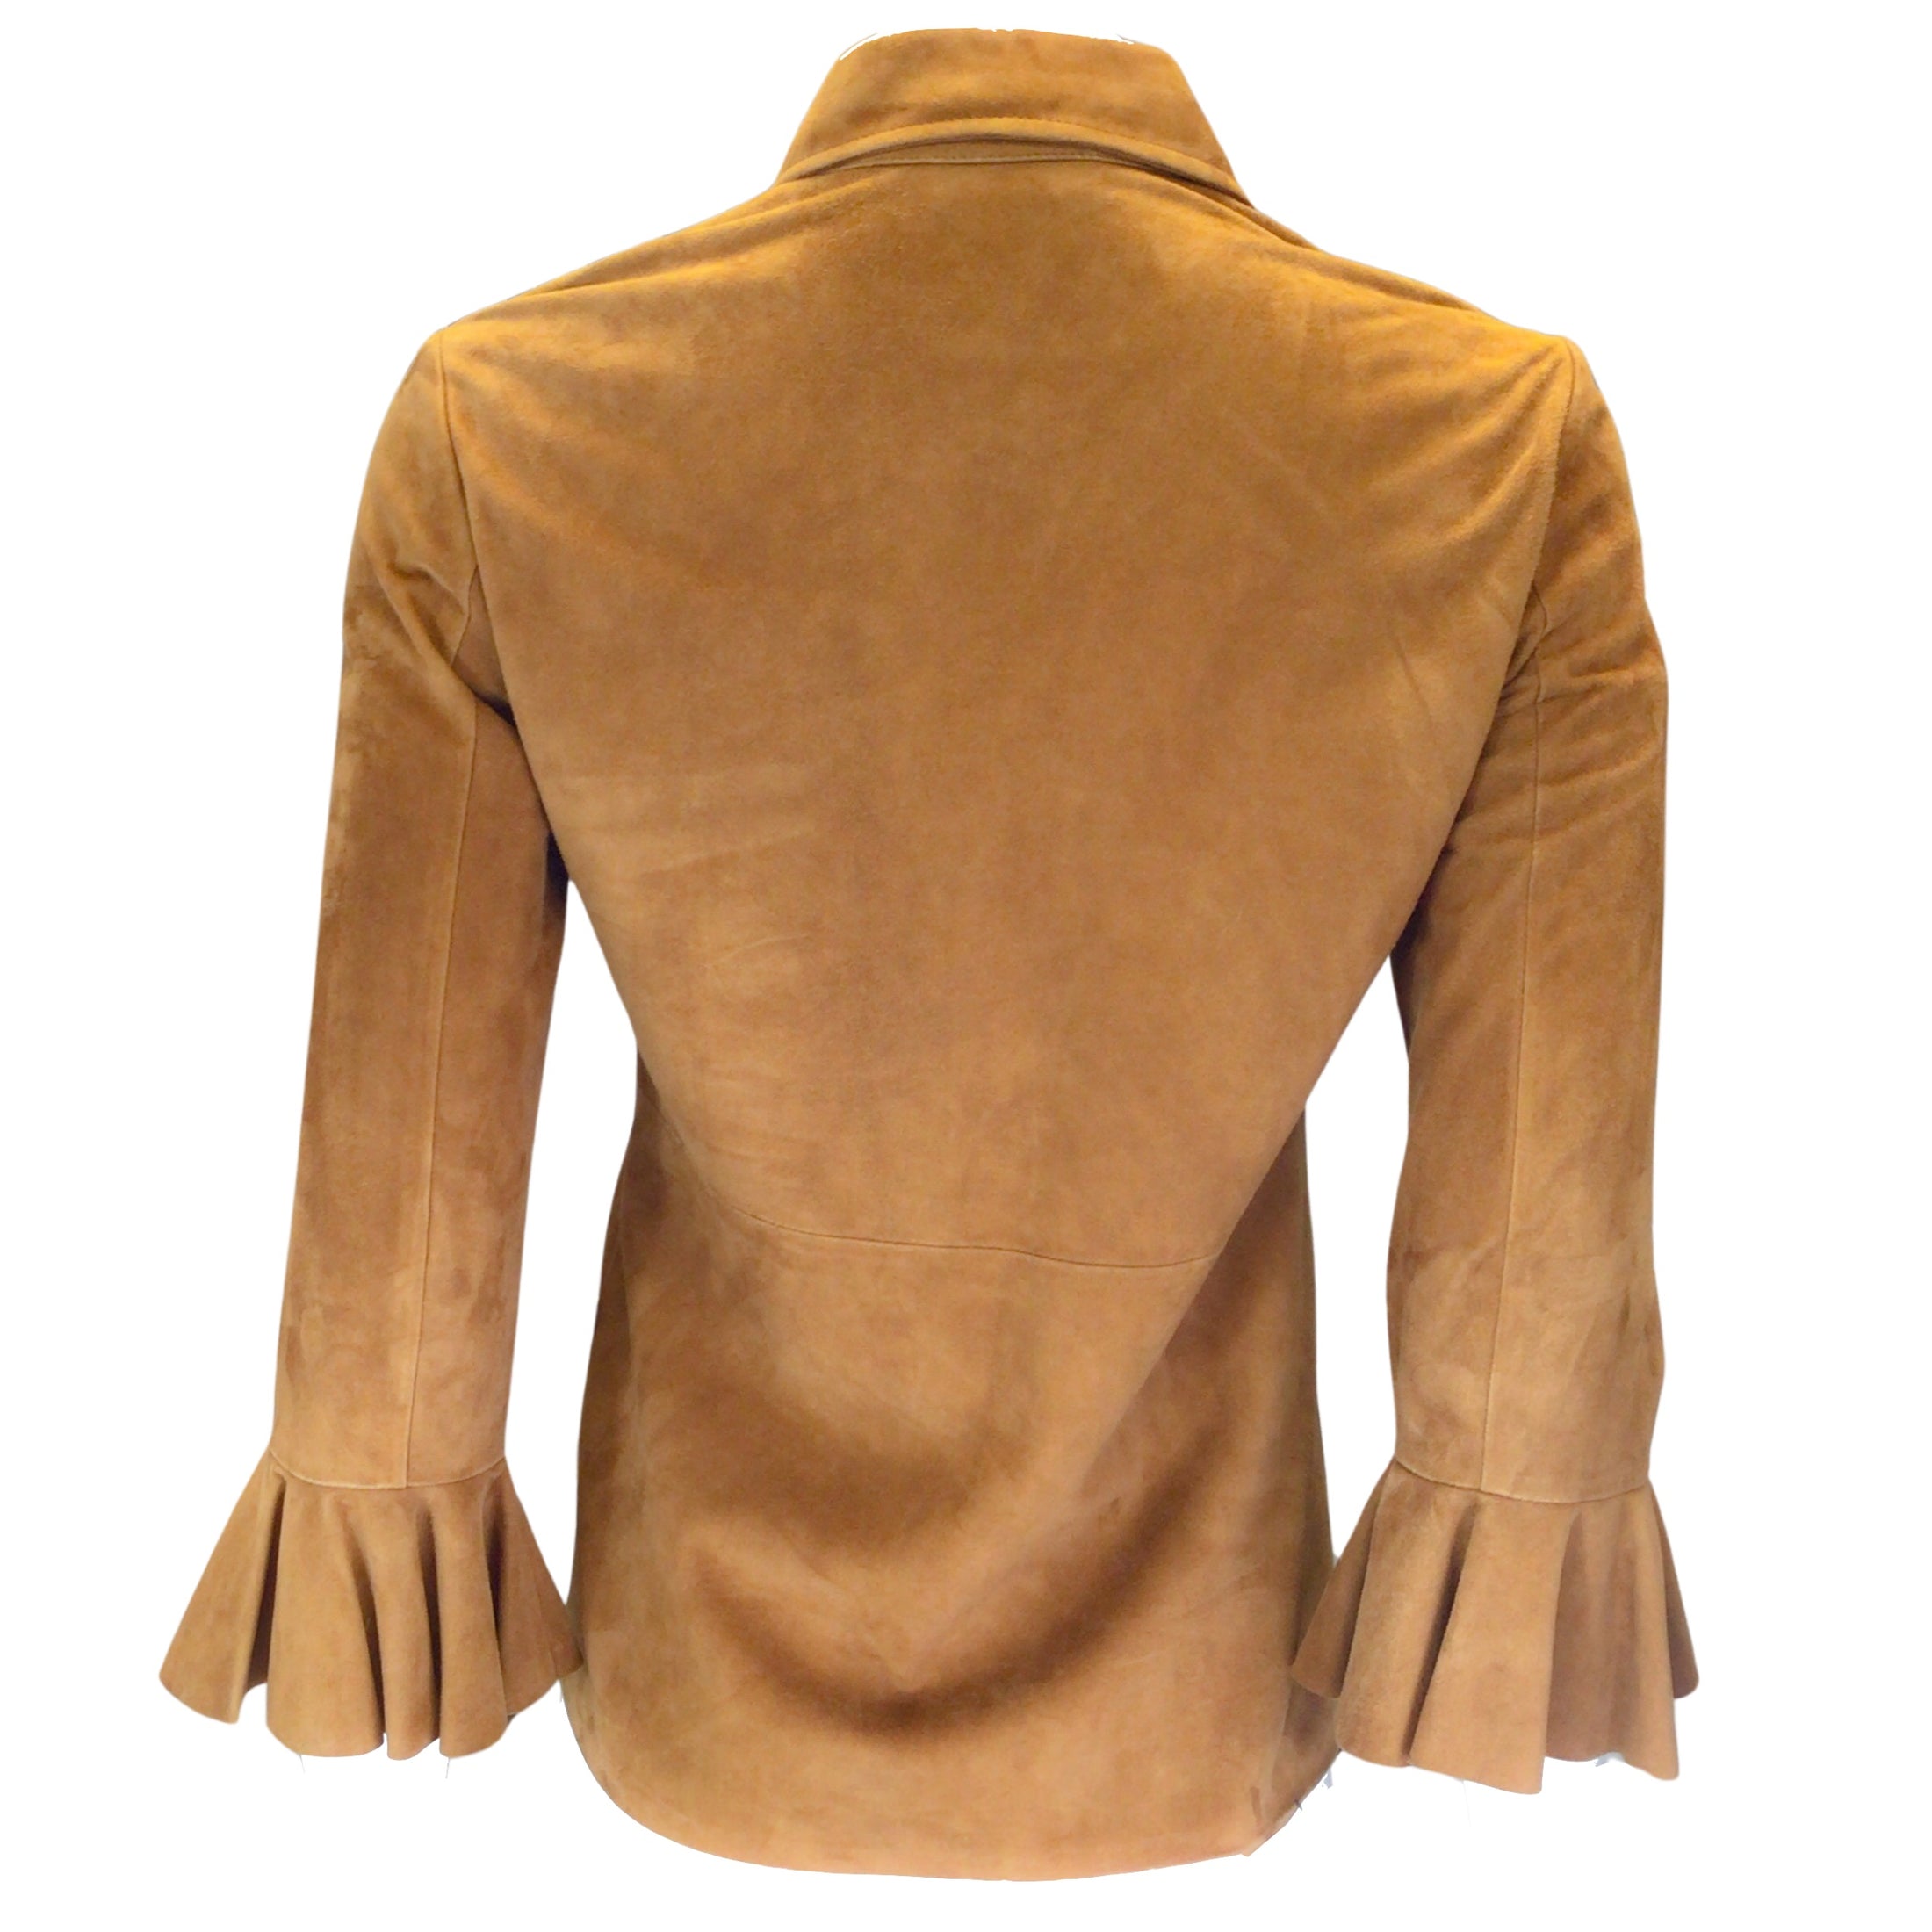 Celine Tan Vintage Ruffled Cuff Button-Front Goatskin Suede Leather Jacket